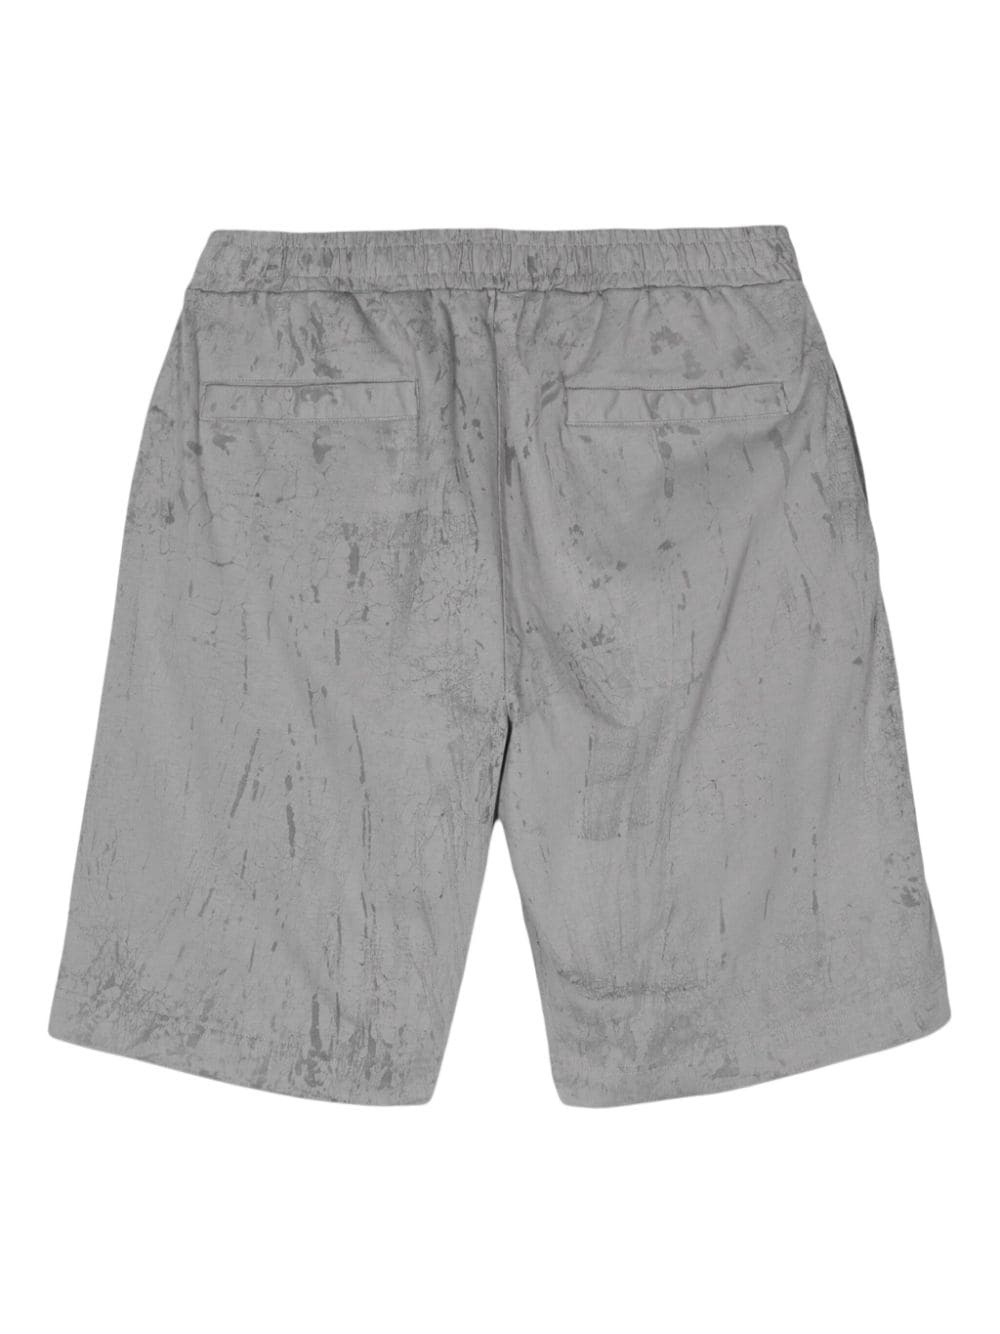 P-Crown-N1 cotton track shorts - 2